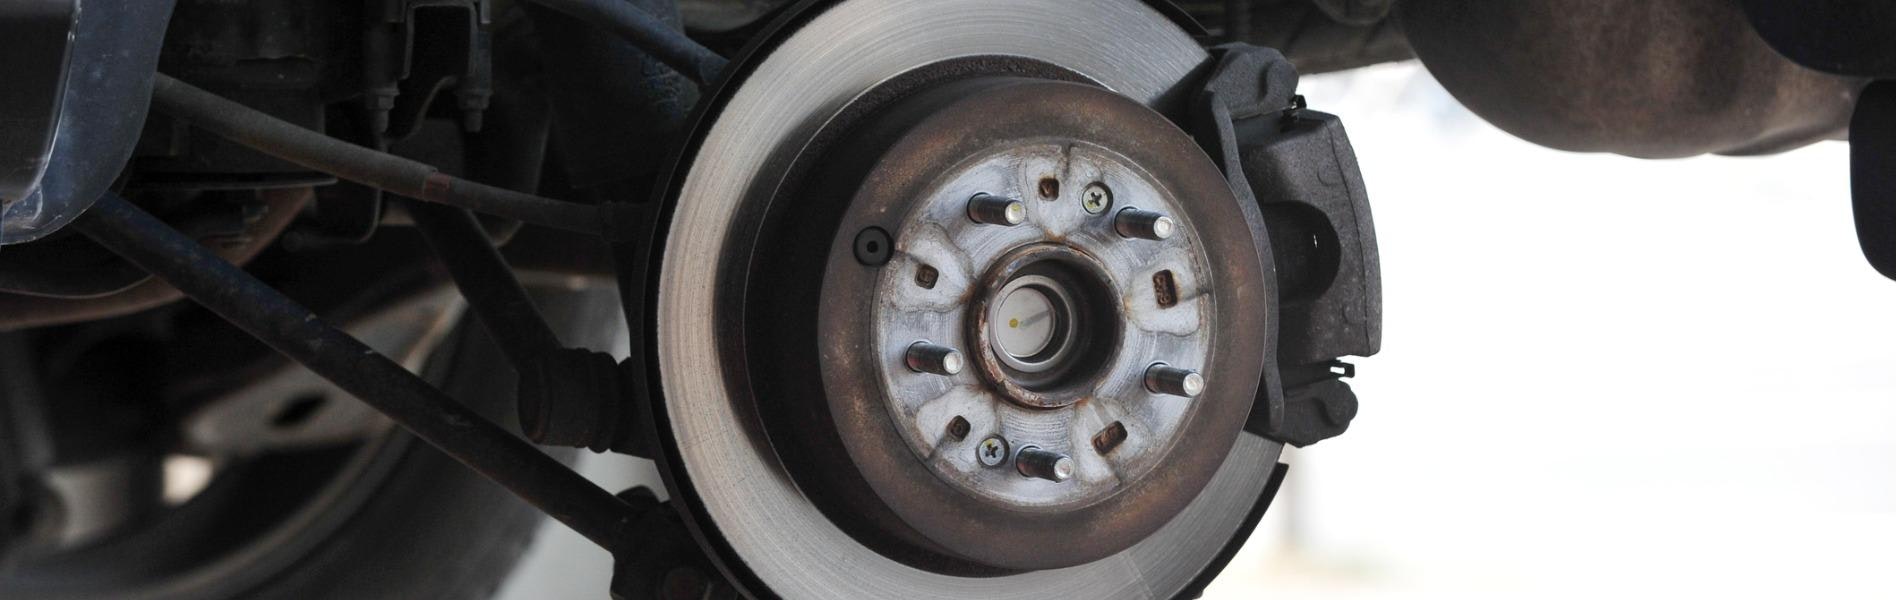 How to Change Brake Pads - The Home Depot